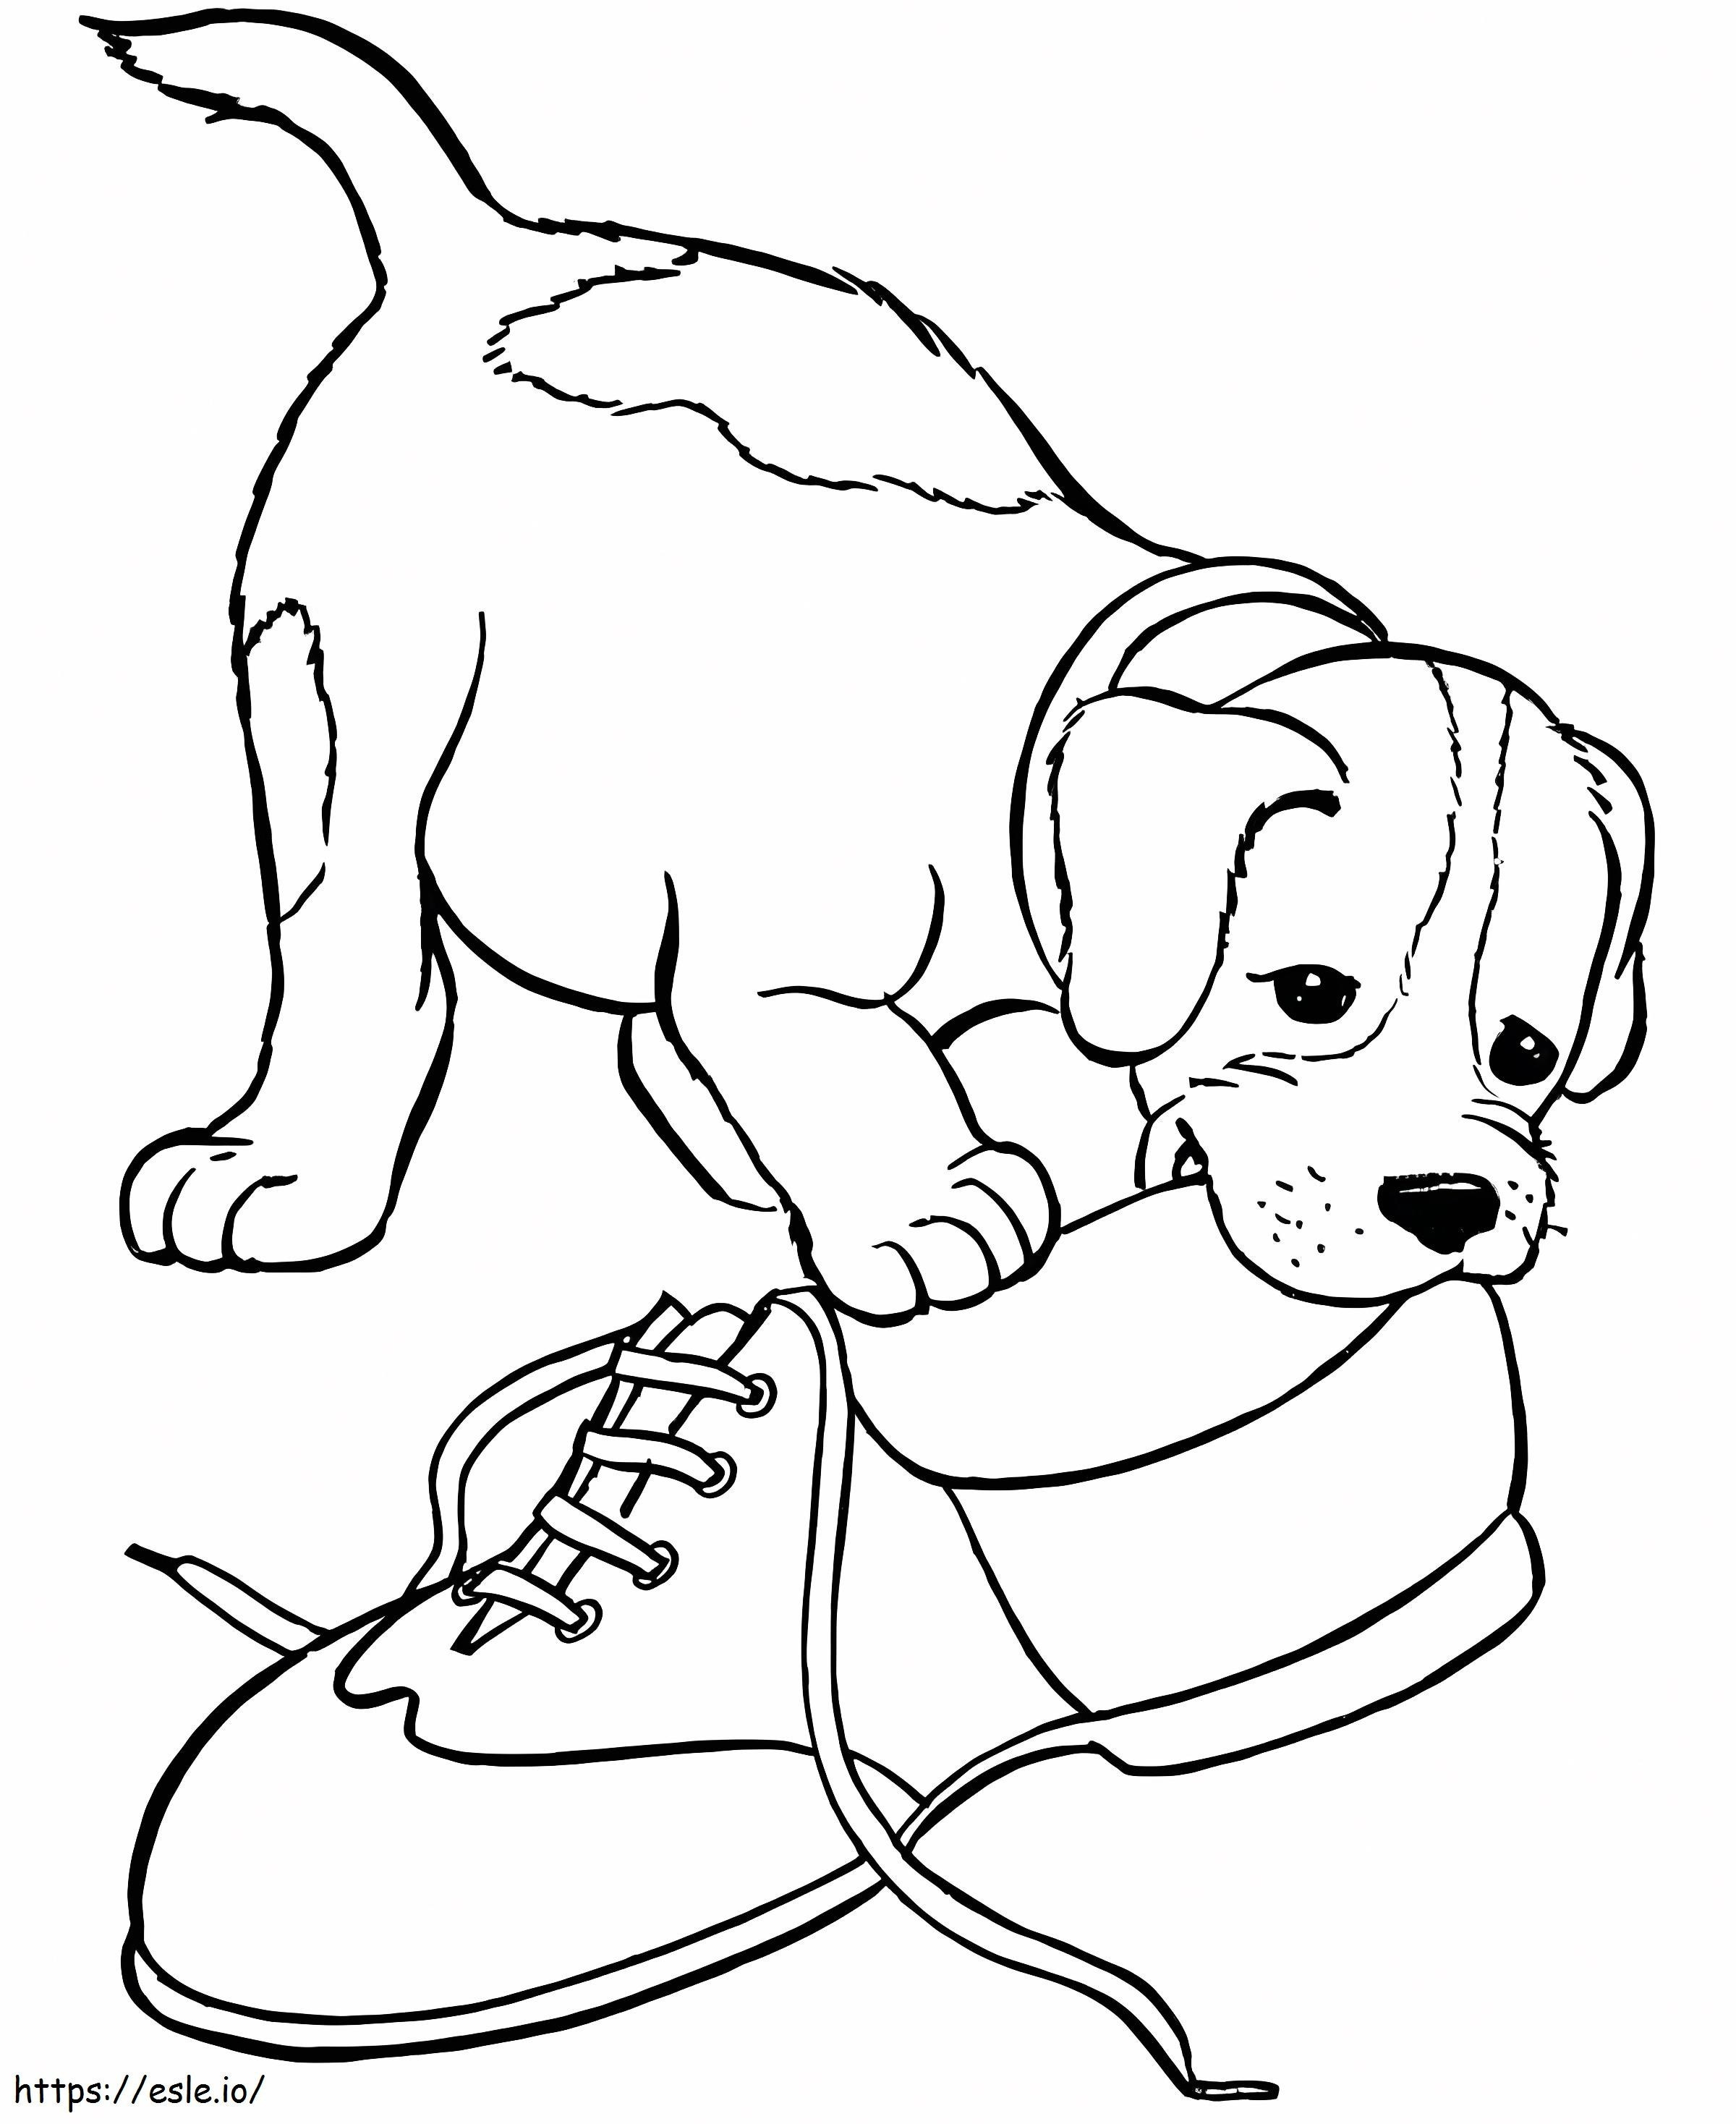 Beagle Chewing On Shoe coloring page